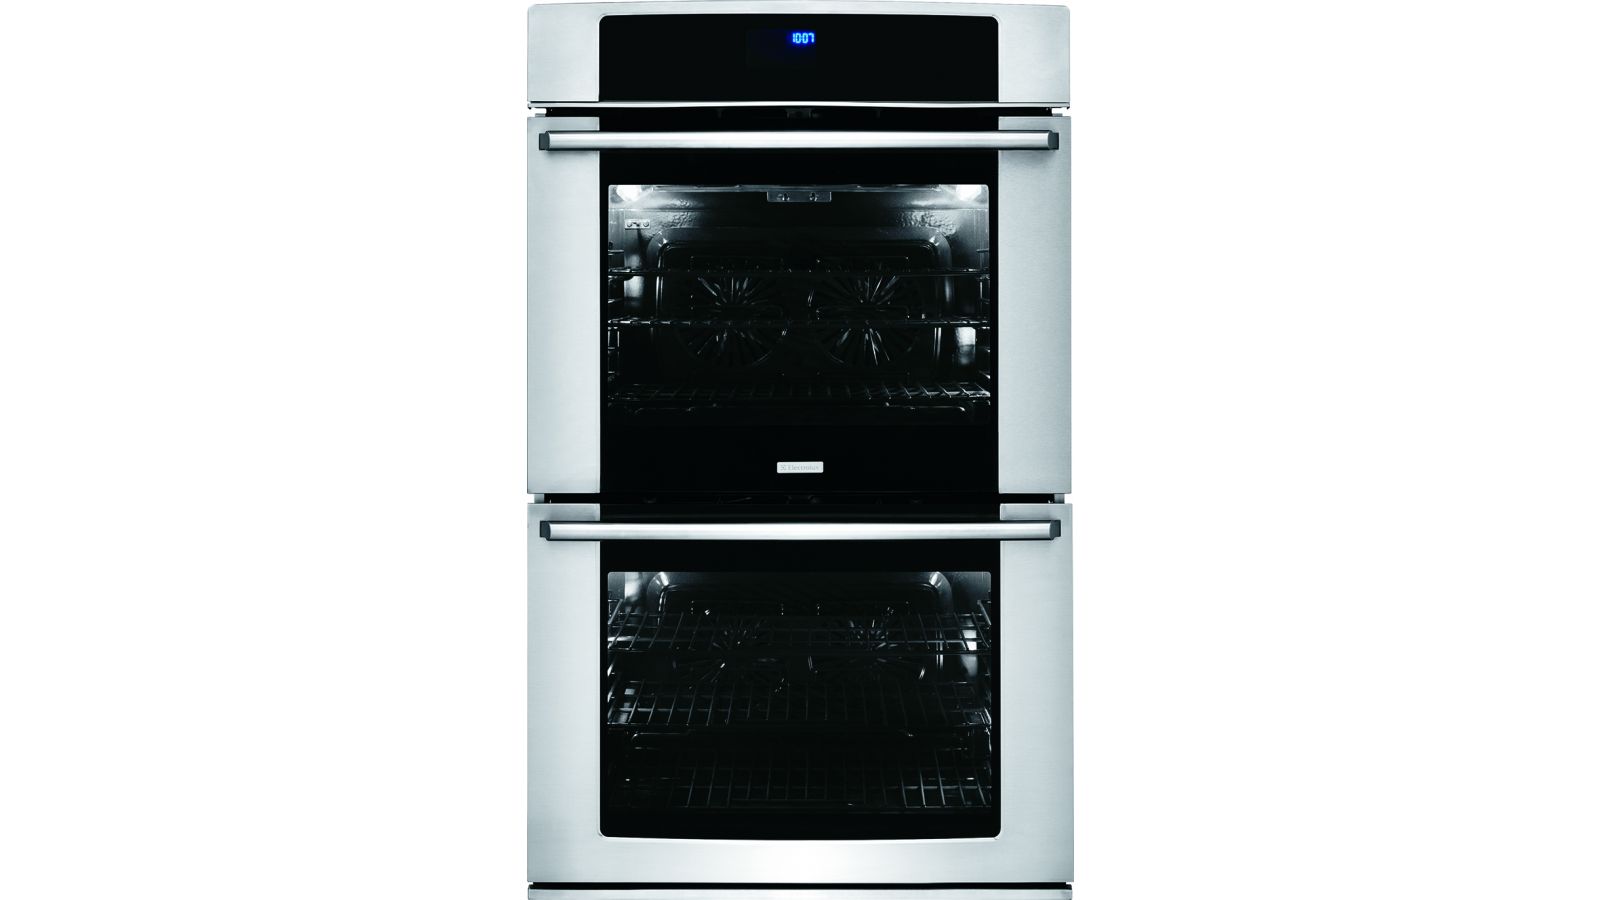 Electrolux 30 Double Wall Oven